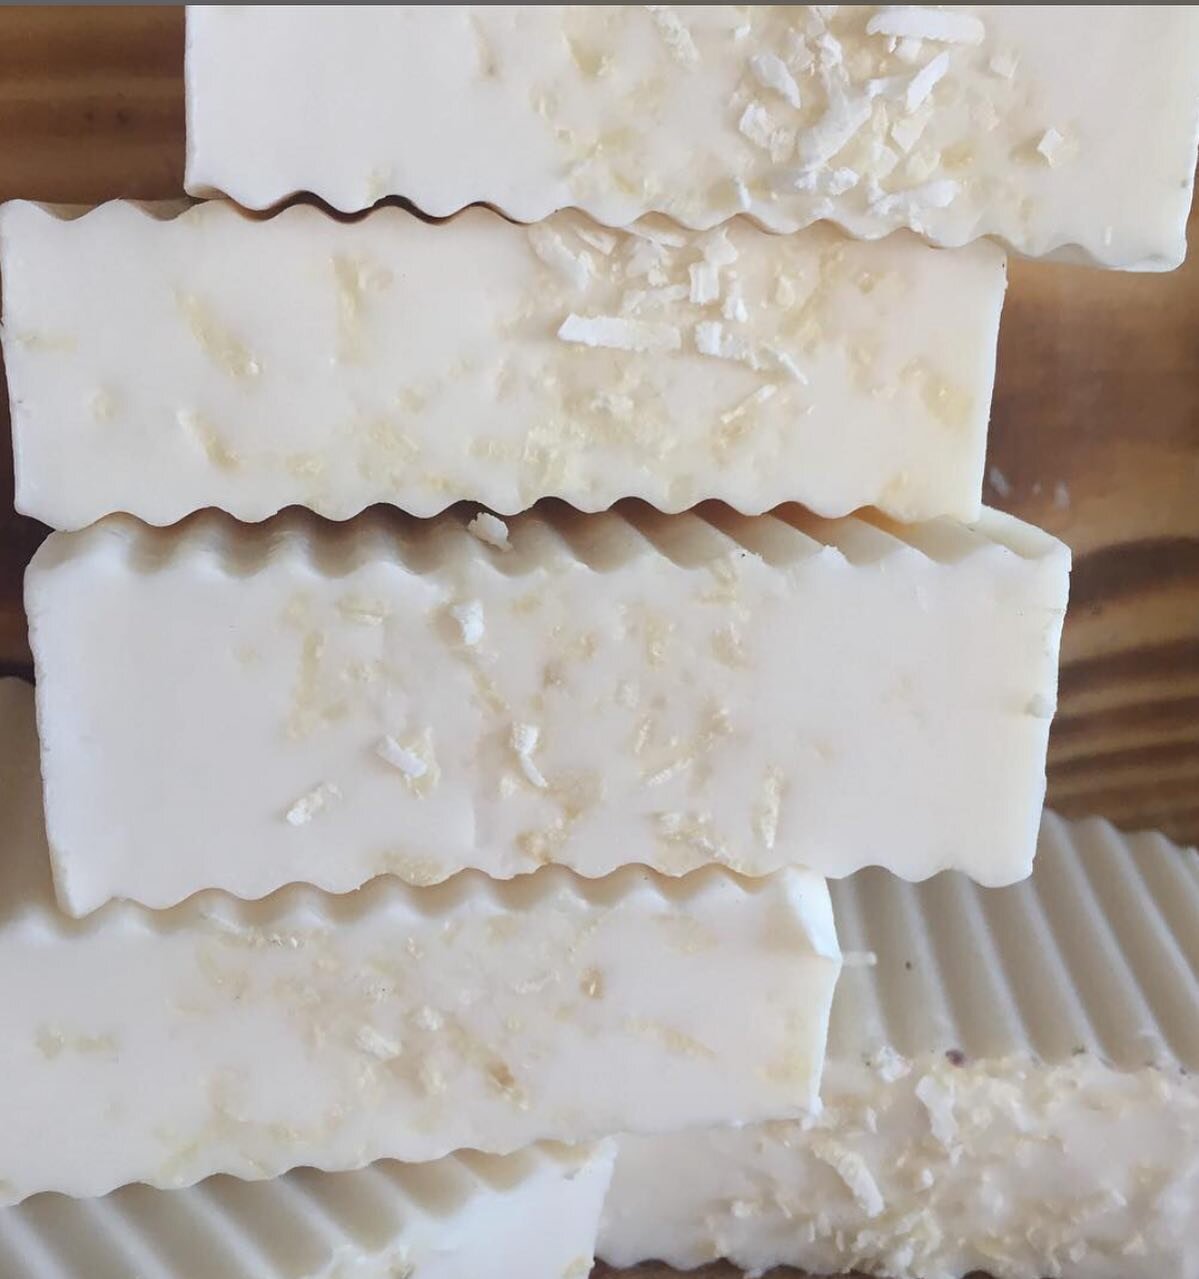 Coconut Almond is another summer essential ✨🌴🥥 Organic food grade coconut and almond extracts smells like coconut ice cream on a hot summer day! It's also our most hydrating soap, perfect for soothing dry summer skin. 

What is your go to hot weath